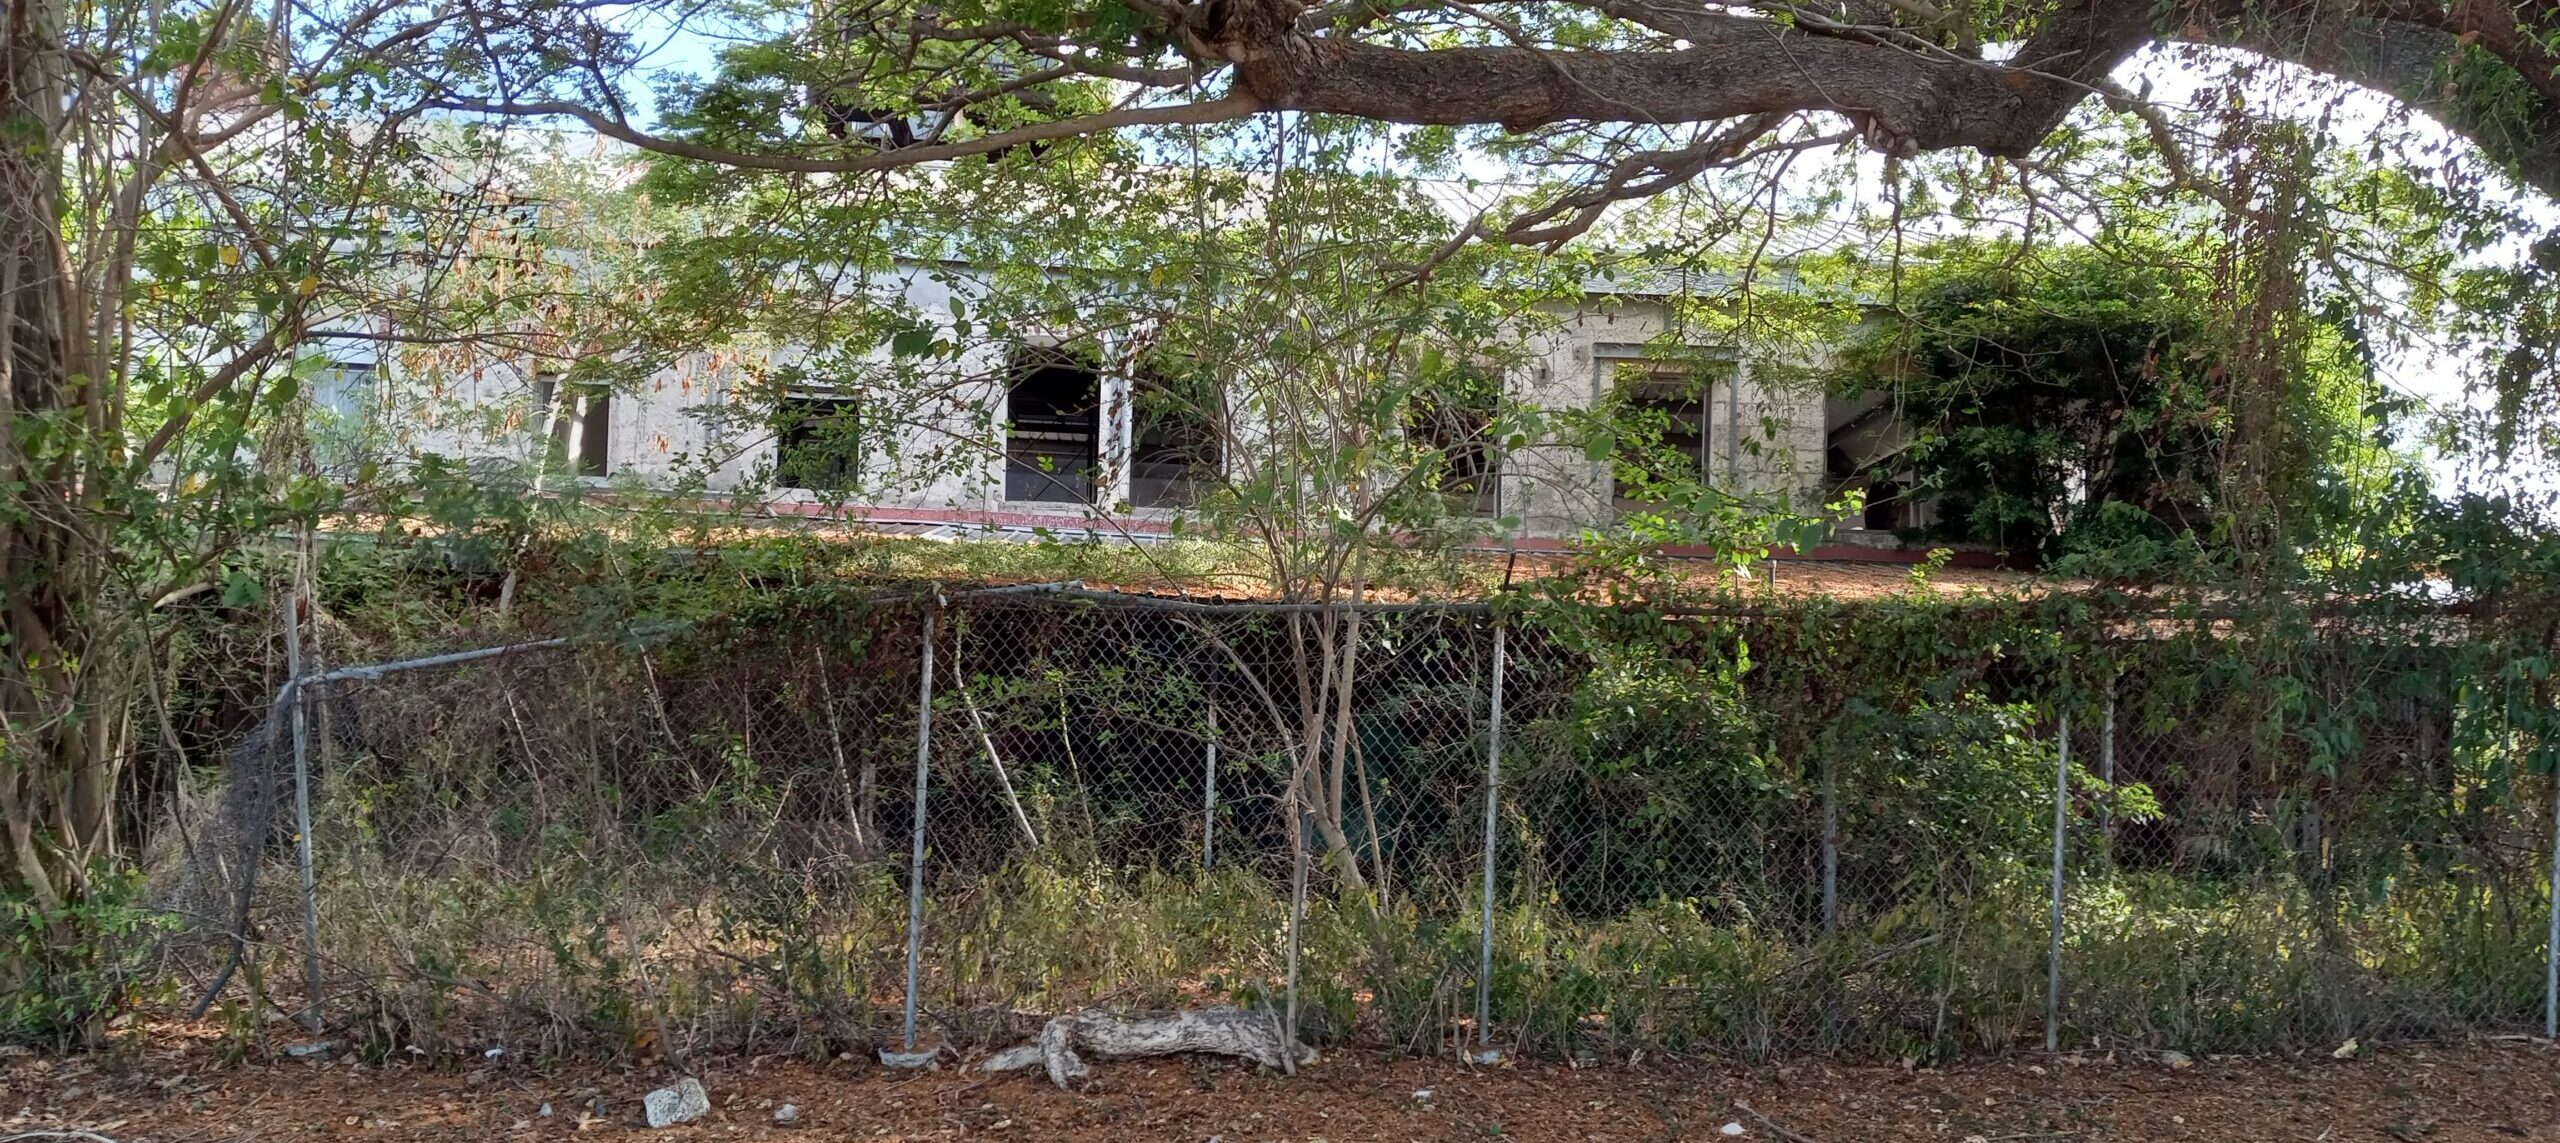 Old sugar factory in Estate La Grange were one of many sites of organizing plans for emancipation. This site should become an Emancipation Museum (Photo by Olasee Davis)